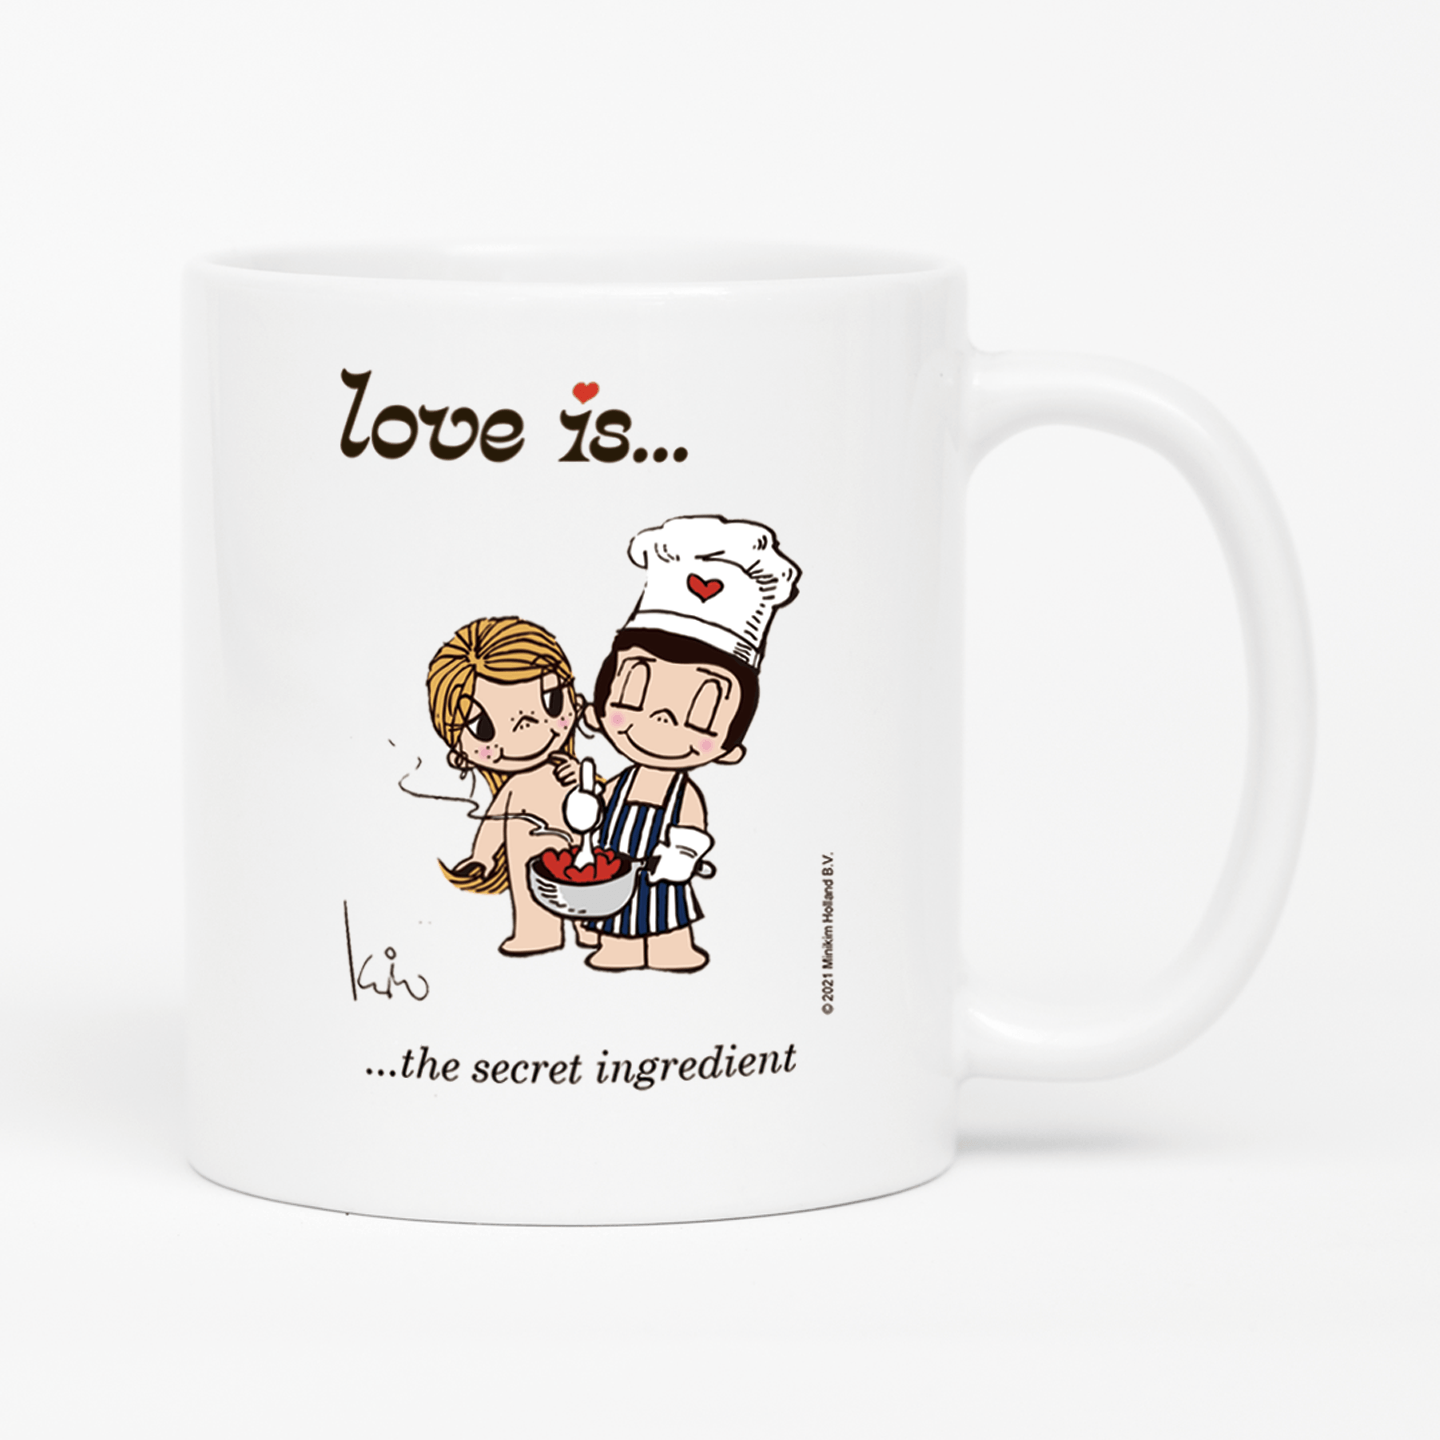 Front view: Love is... the secret ingredient personalized ceramic mug by Kim Casali.